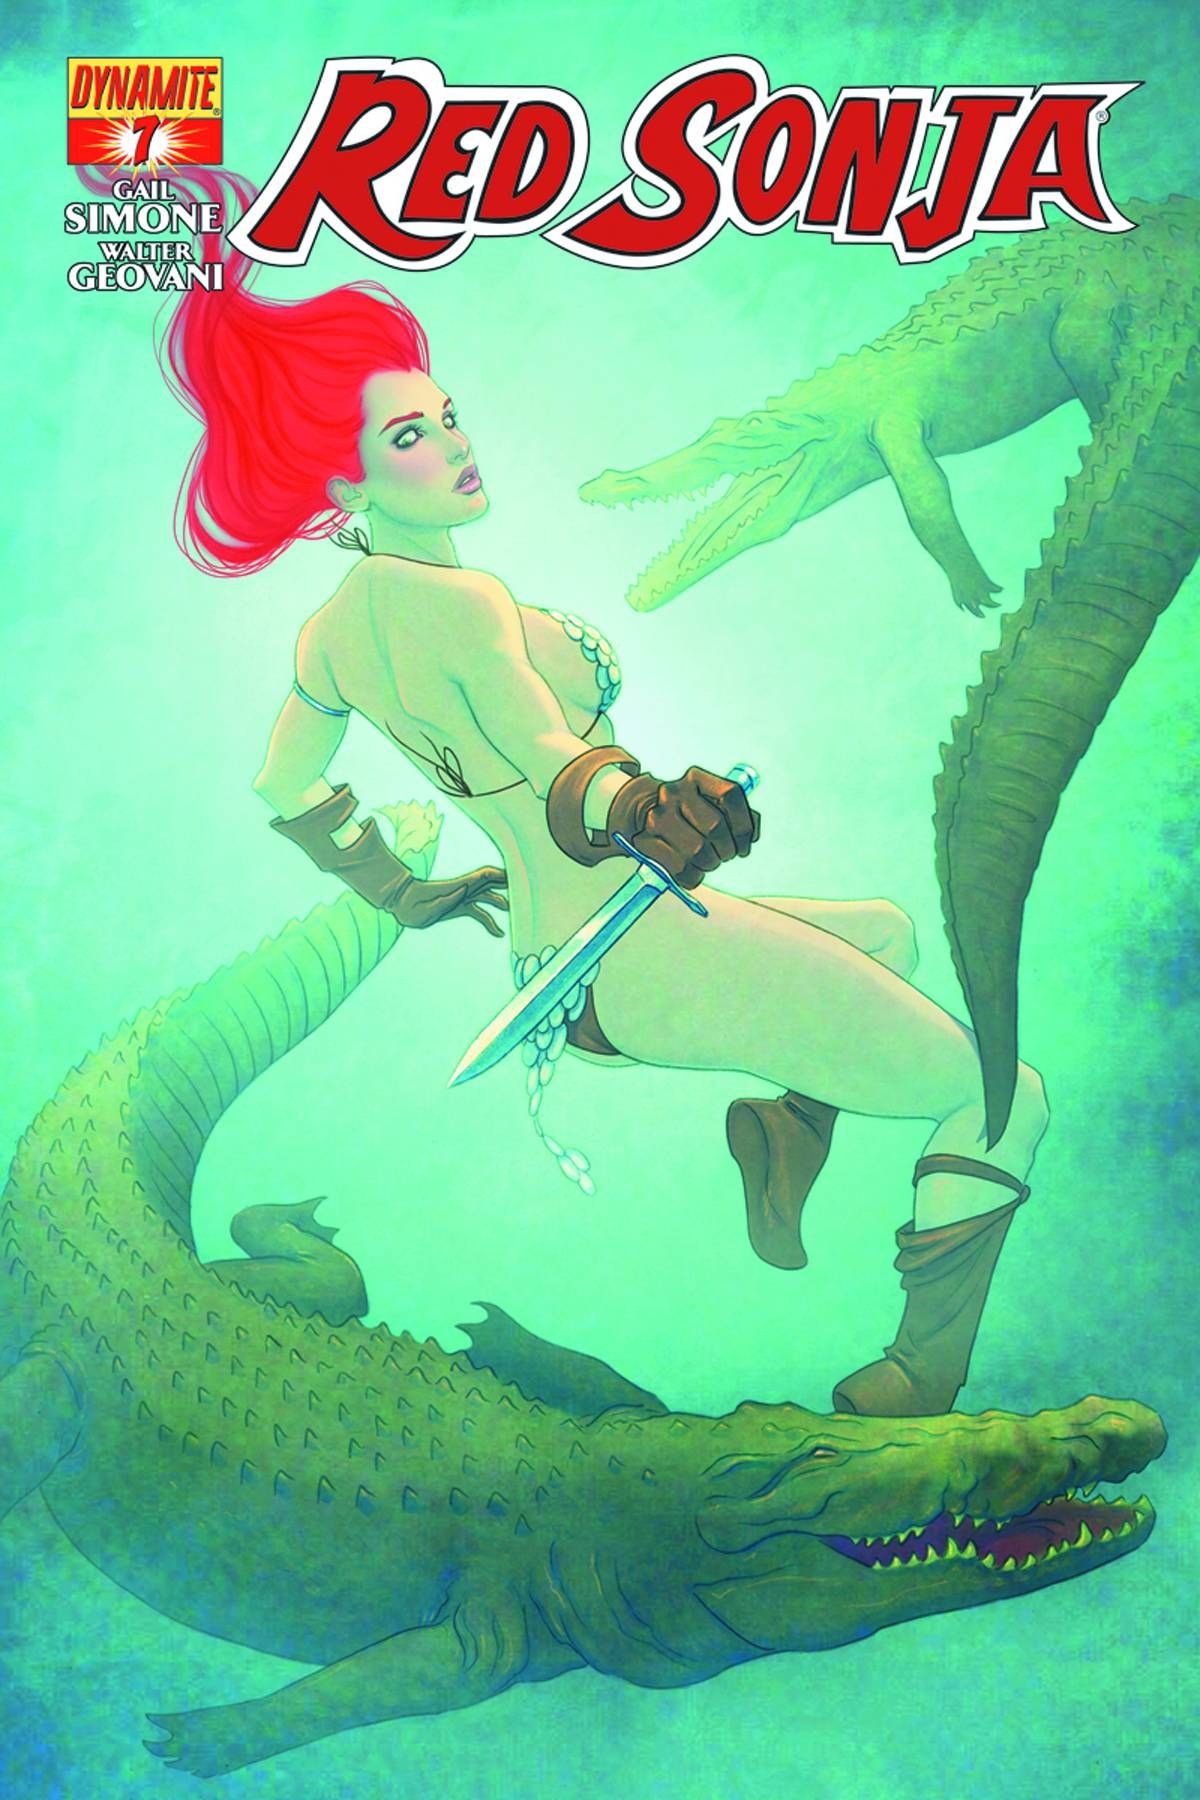 Red Sonja #7 (Frison Cover) Comic